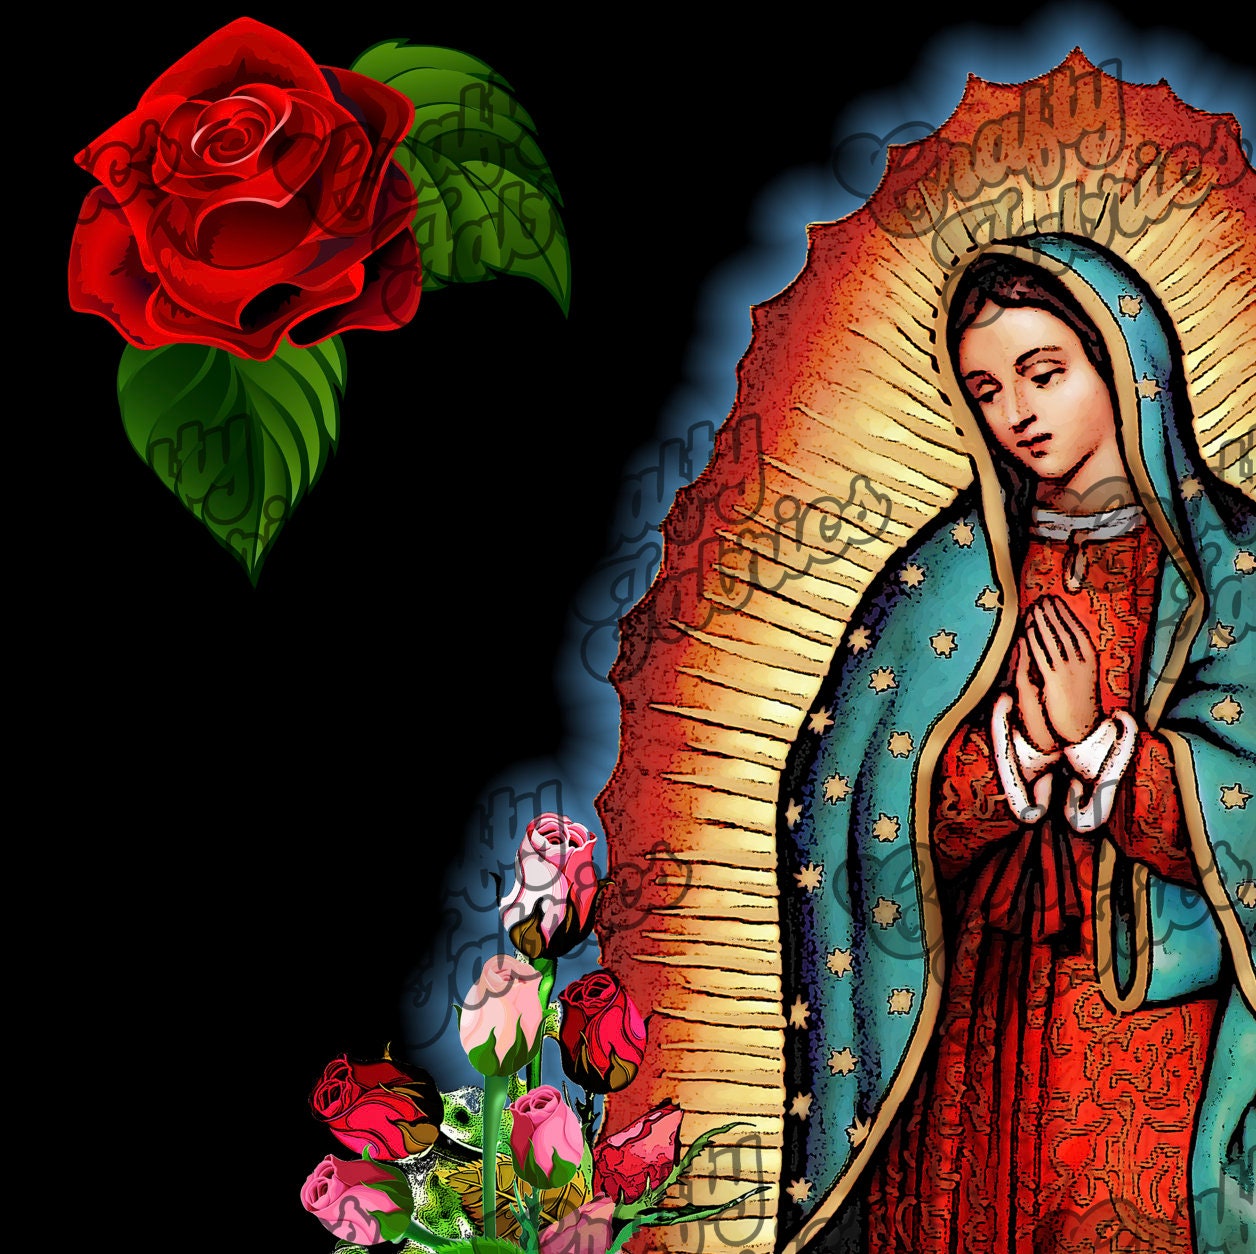 Our Lady of Guadalupe Fabric panel, Virgin Mary Black fabric square for crafts, pillow covers, wall hanging, bandana or clothing